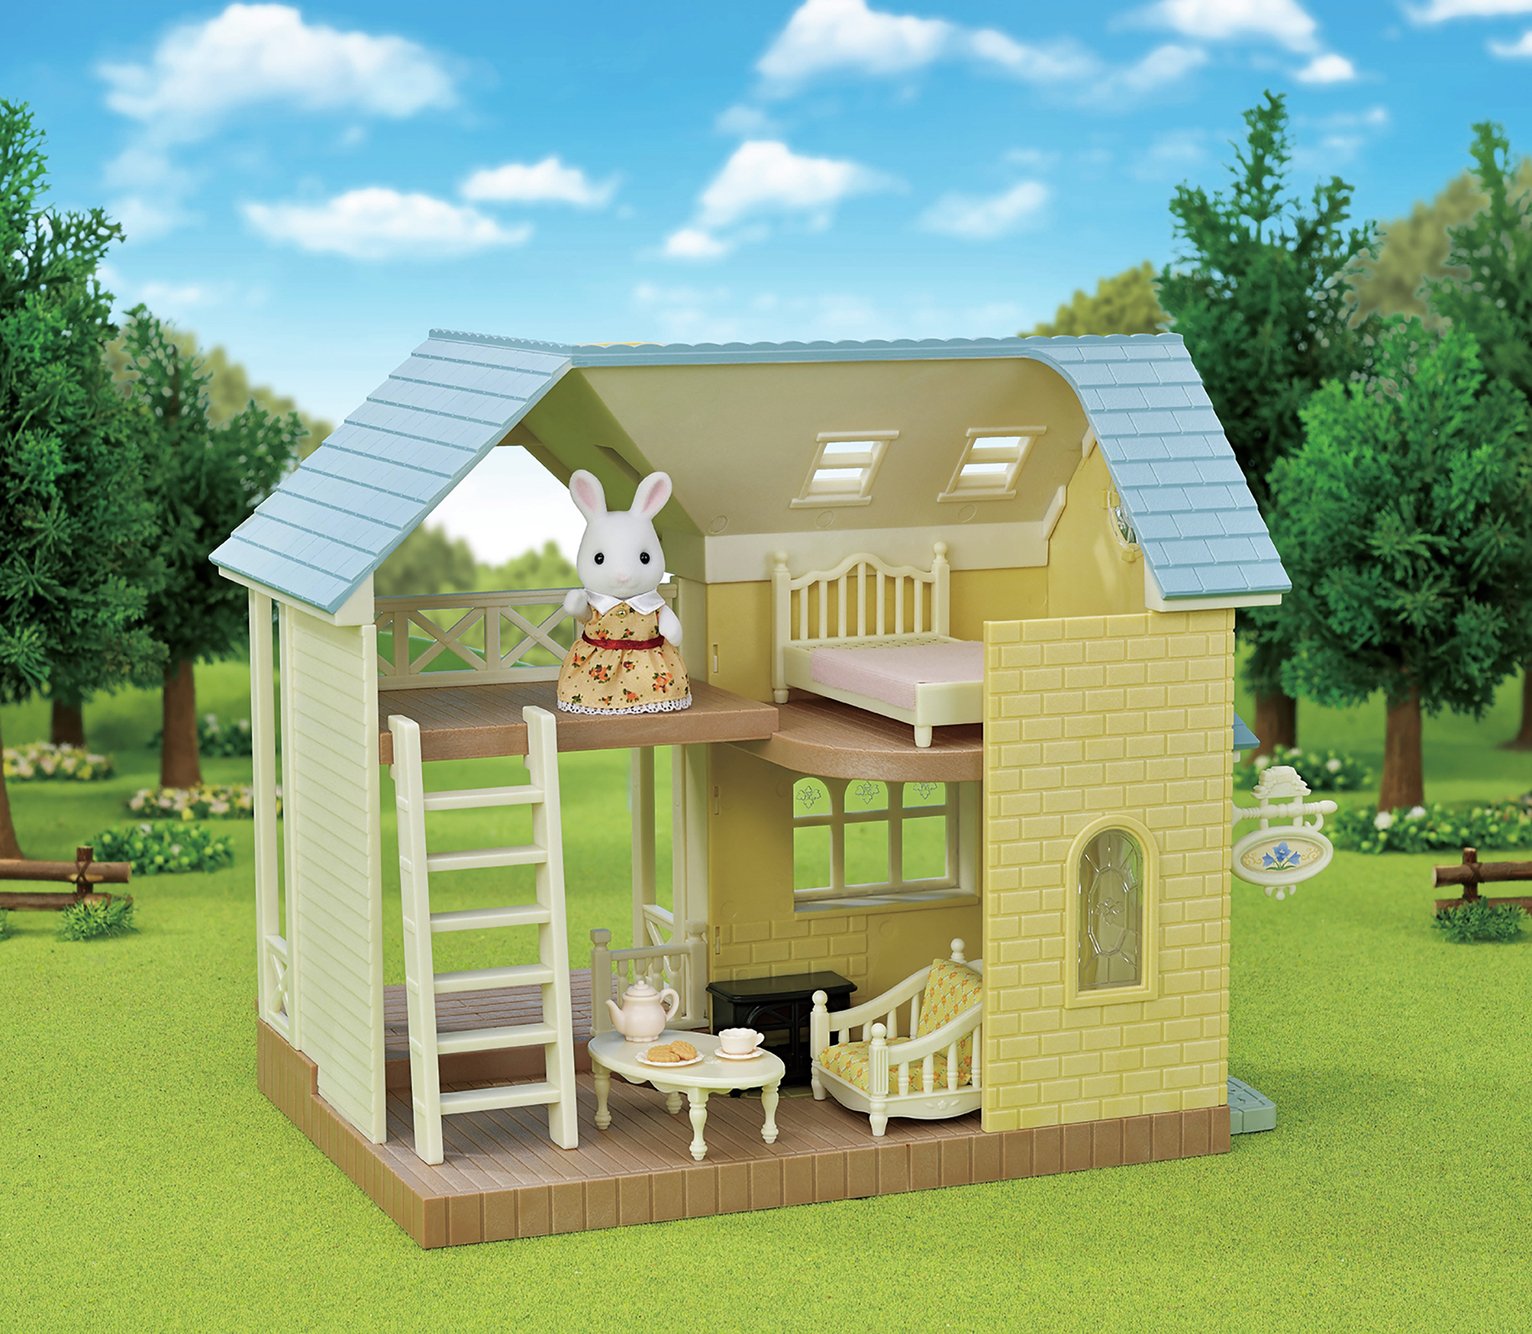 Sylvanian Families Blue Bell Gift Set review